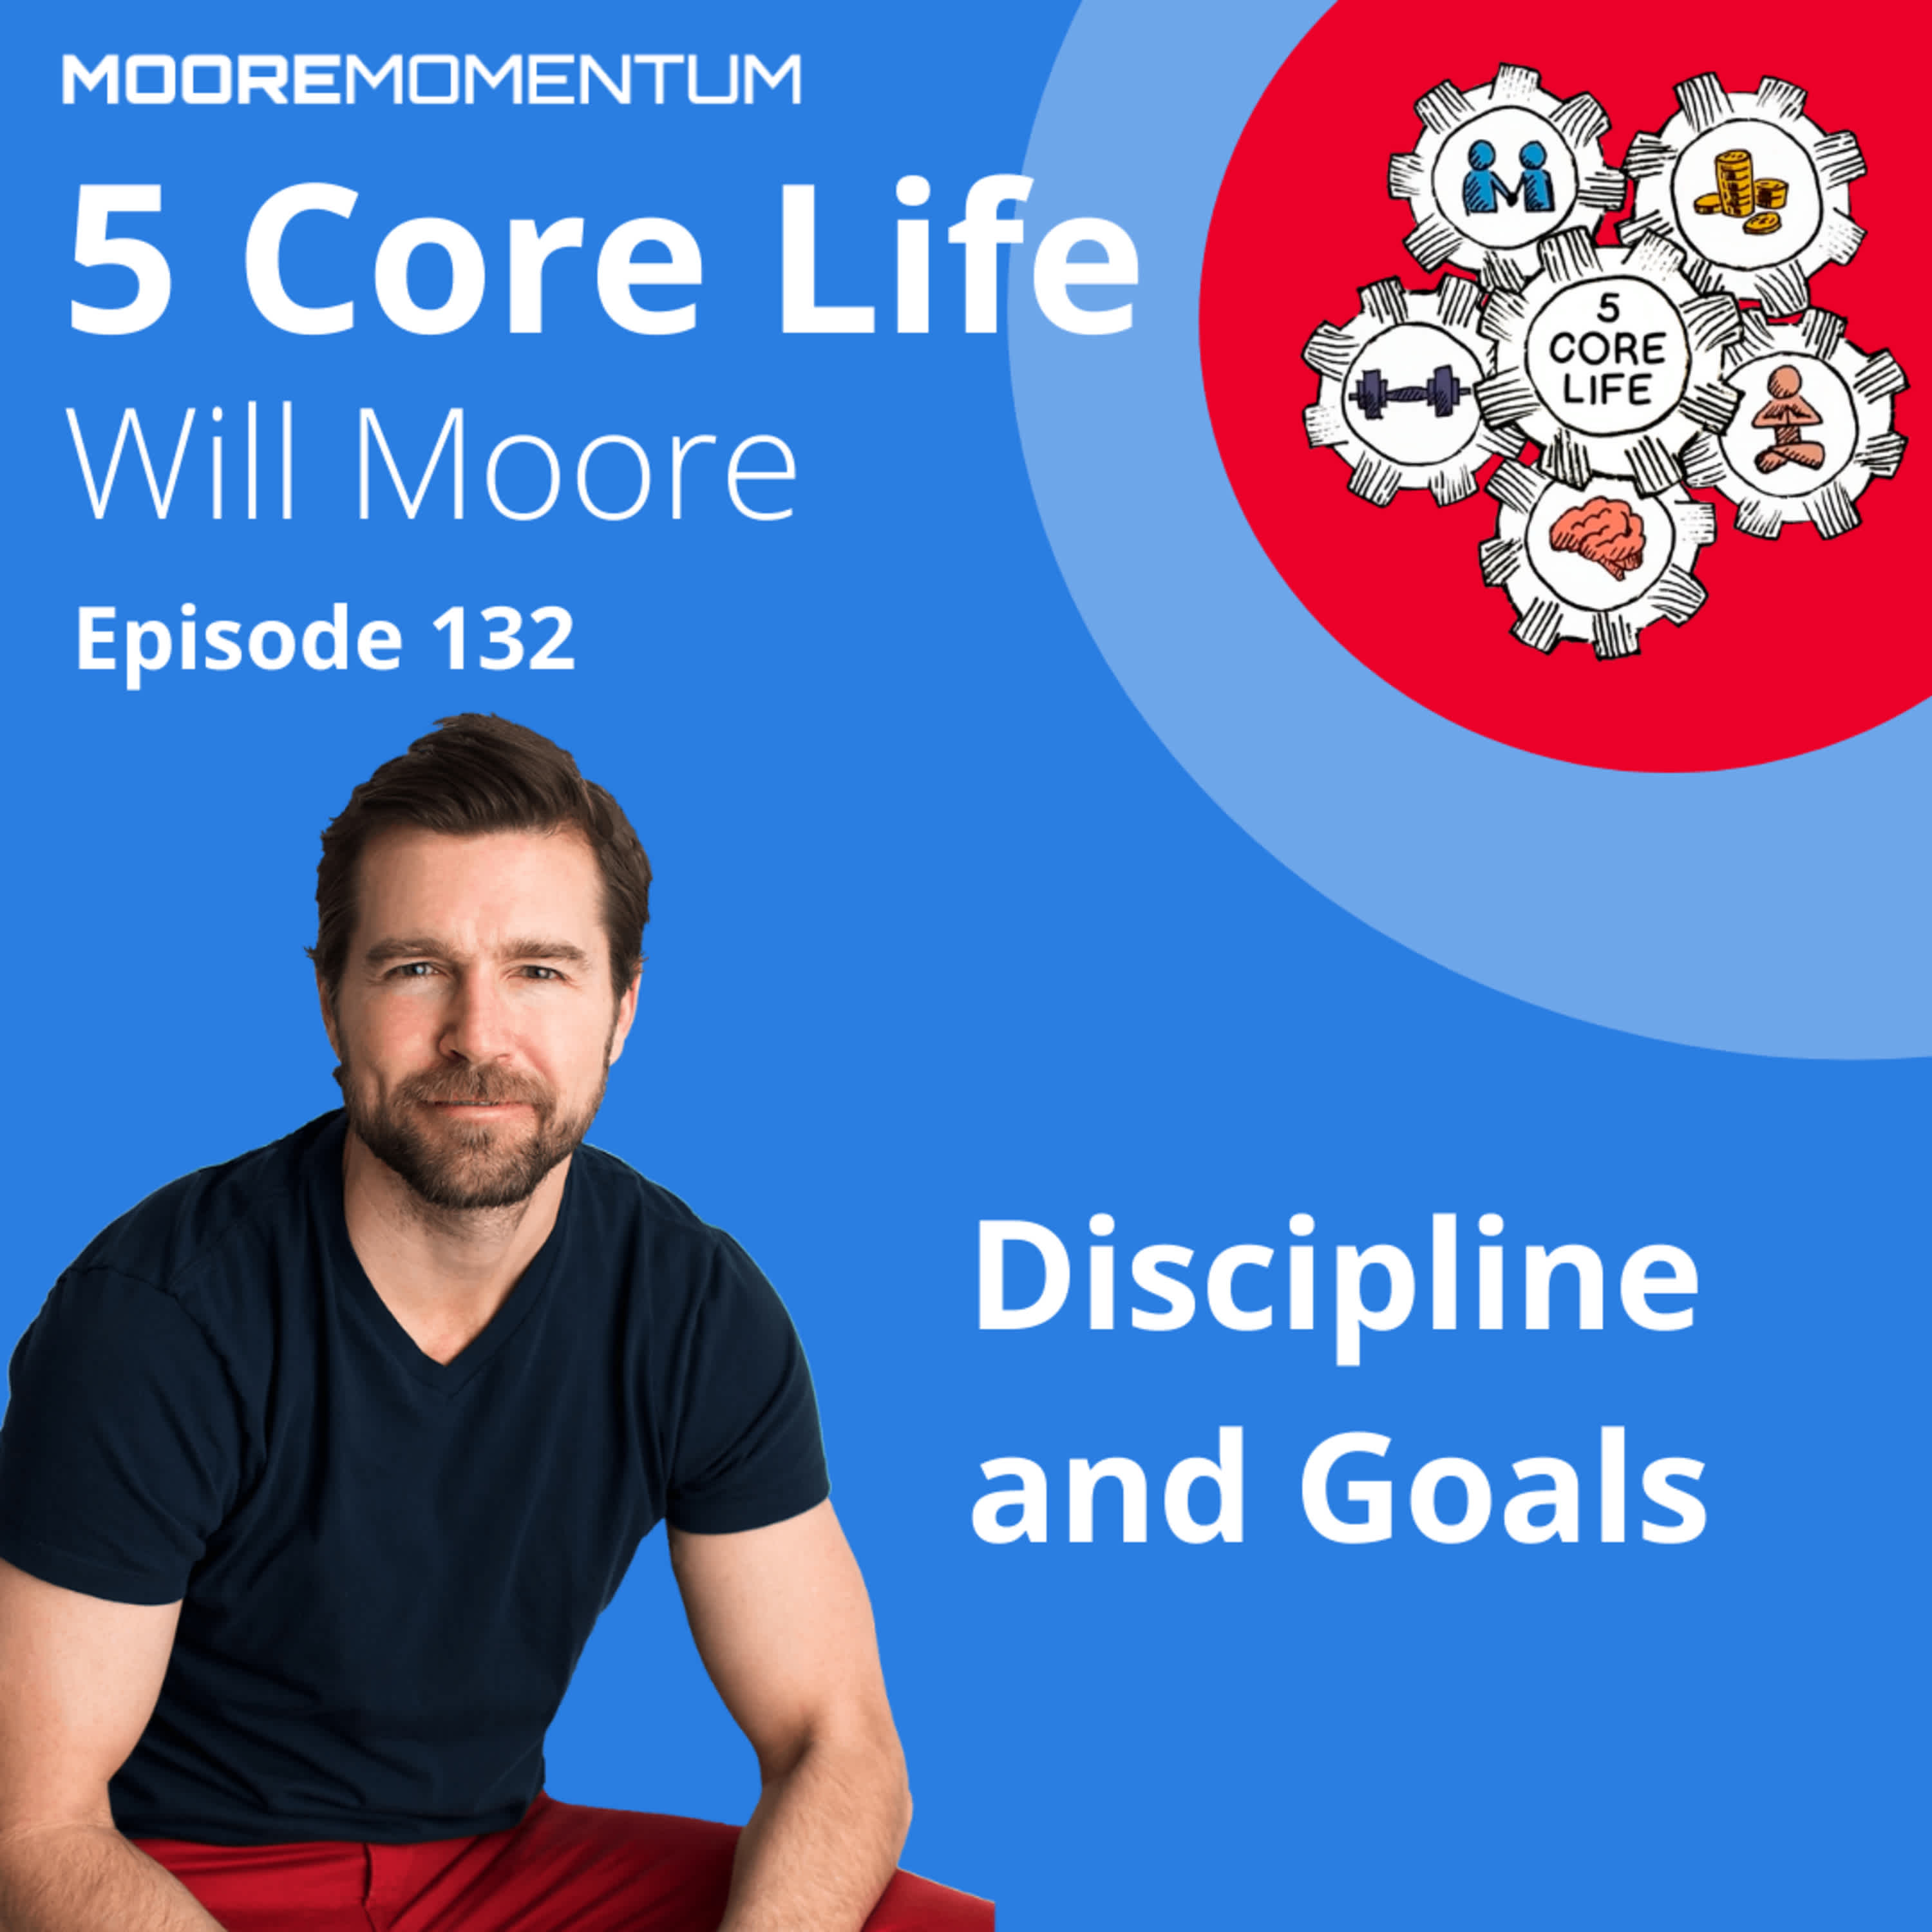 Discipline and Goals, Gamify Your Life Habits, Goal Setting 2021
